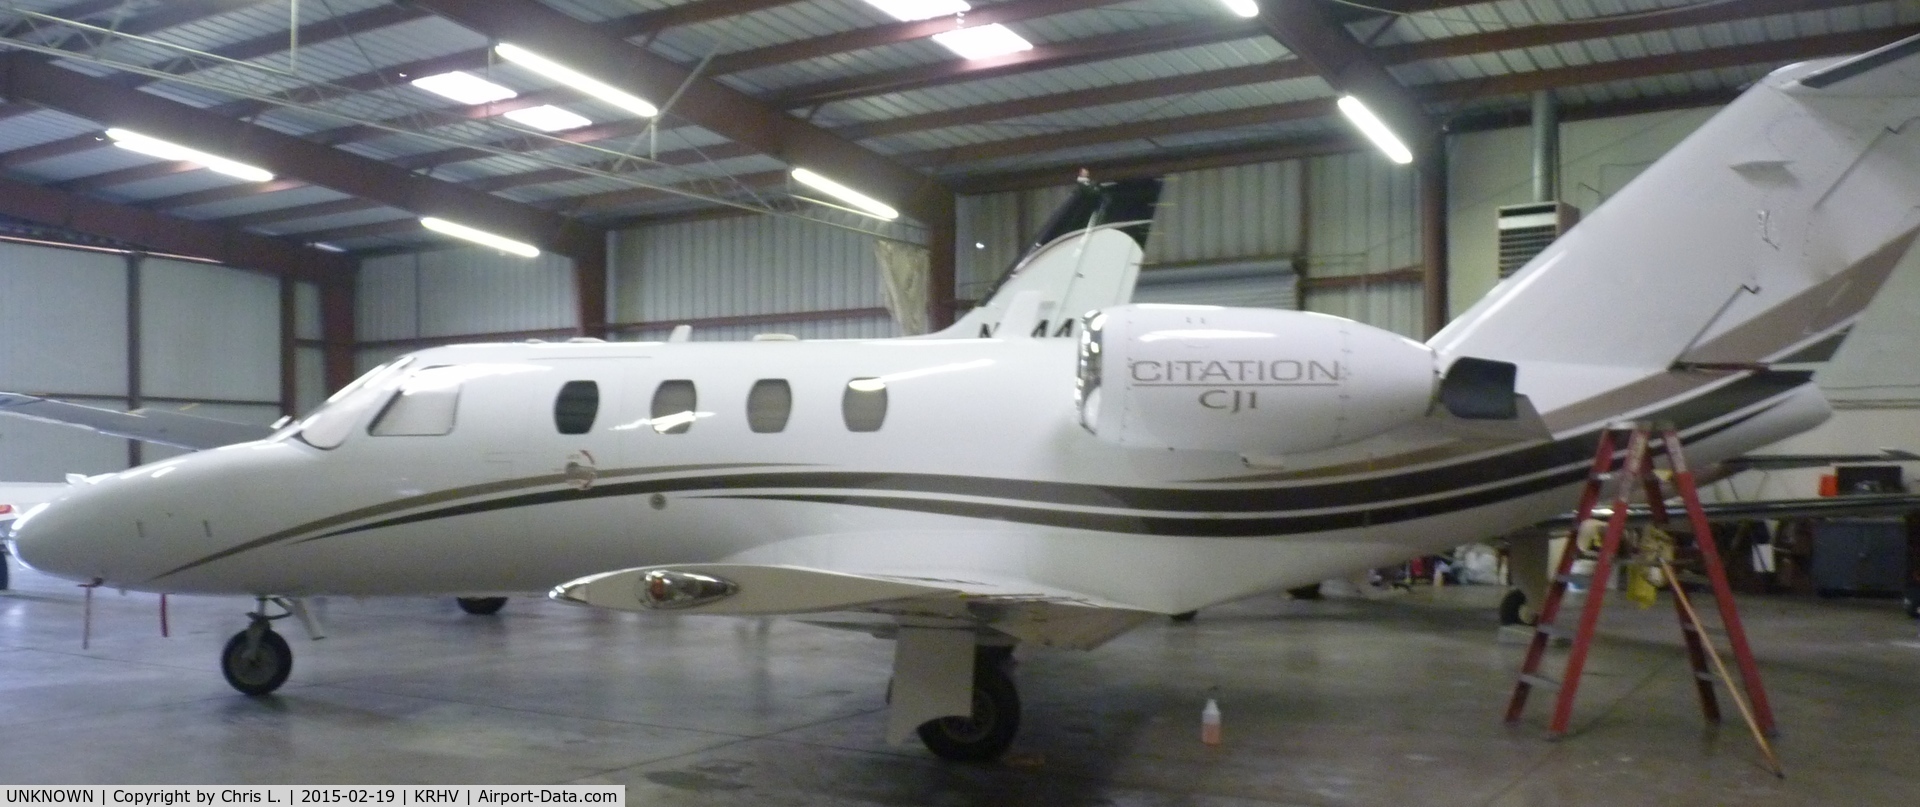 UNKNOWN, Miscellaneous Various C/N unknown, A rare and local Cessna Citation jet 1 is the only locally based airplane inside the Lafferty Aircraft Sales hangar.